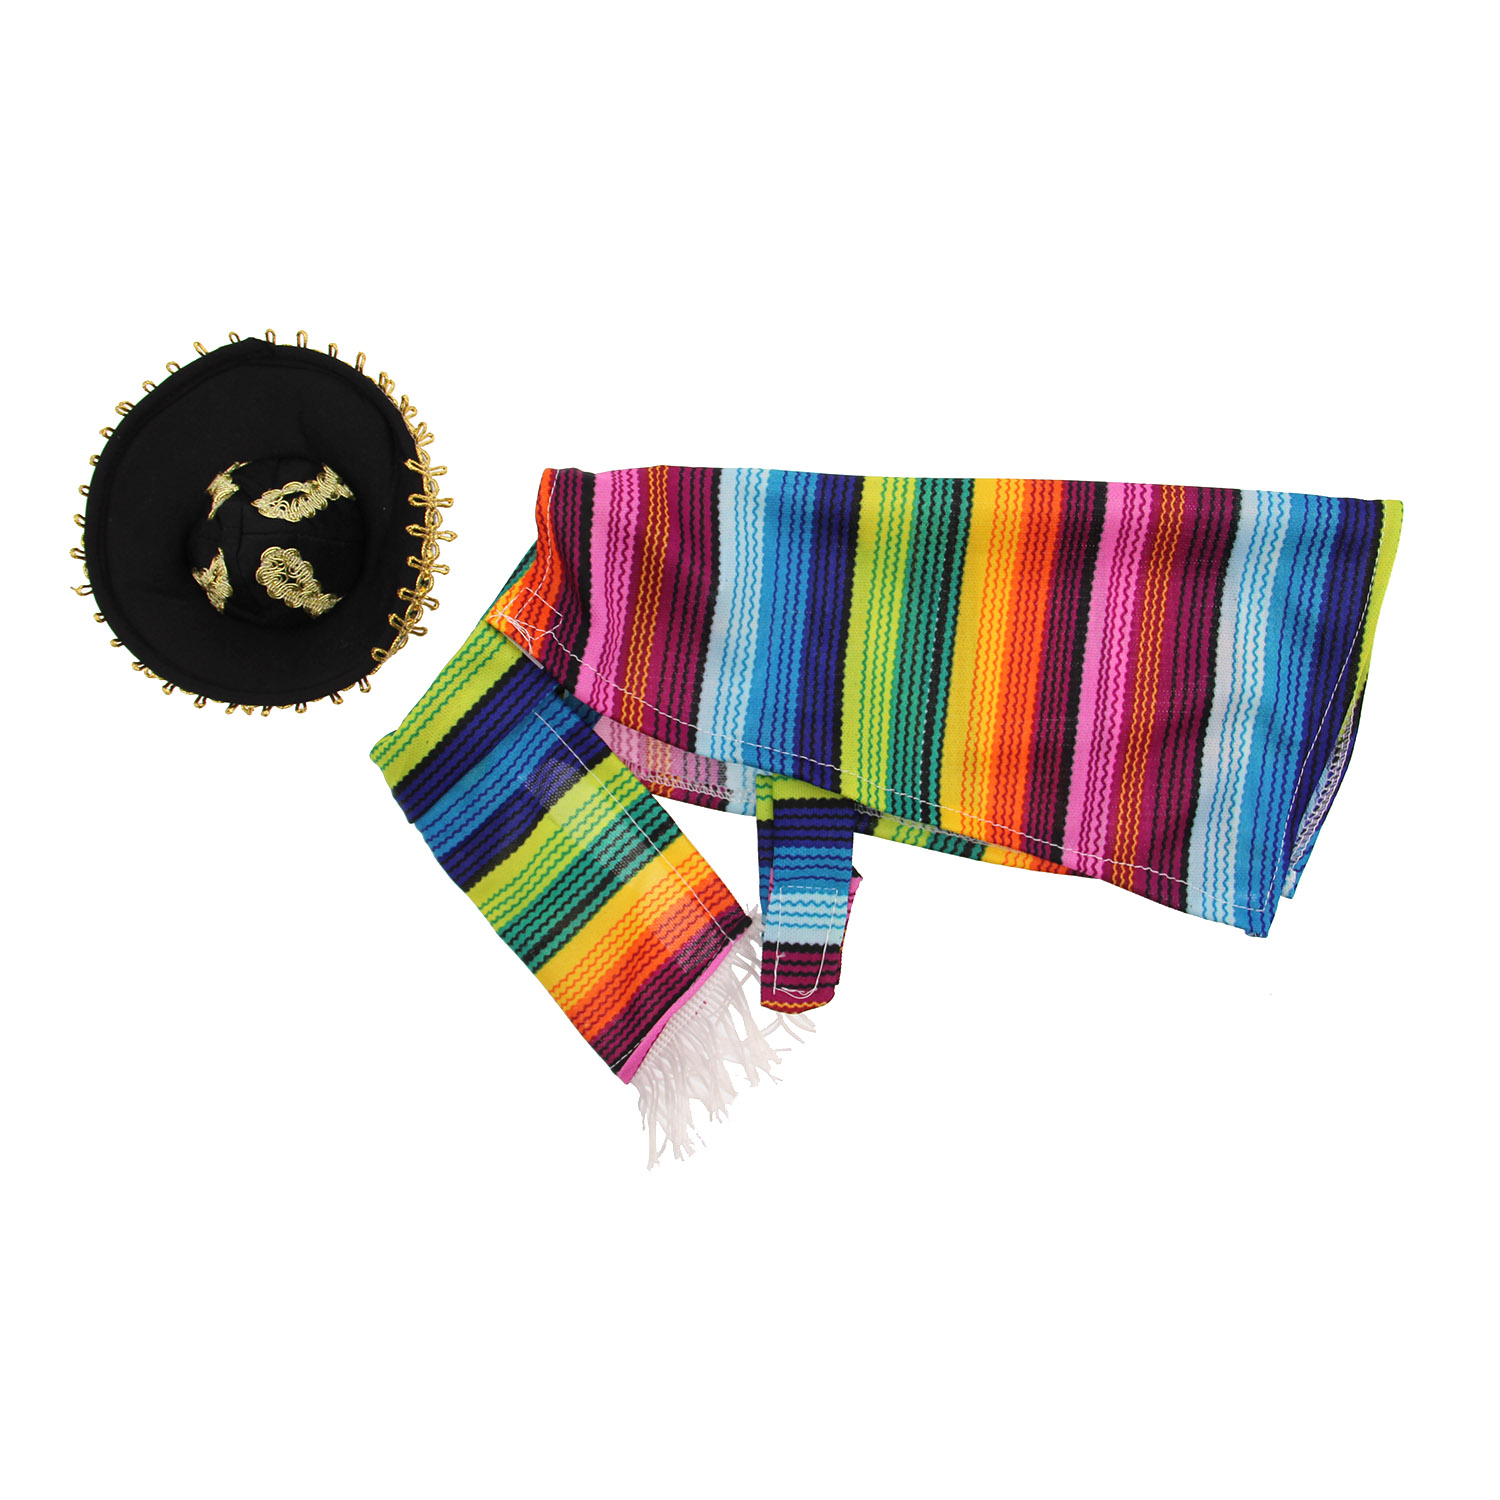 Rubies Official Mexican Serape Pet Dog Costume